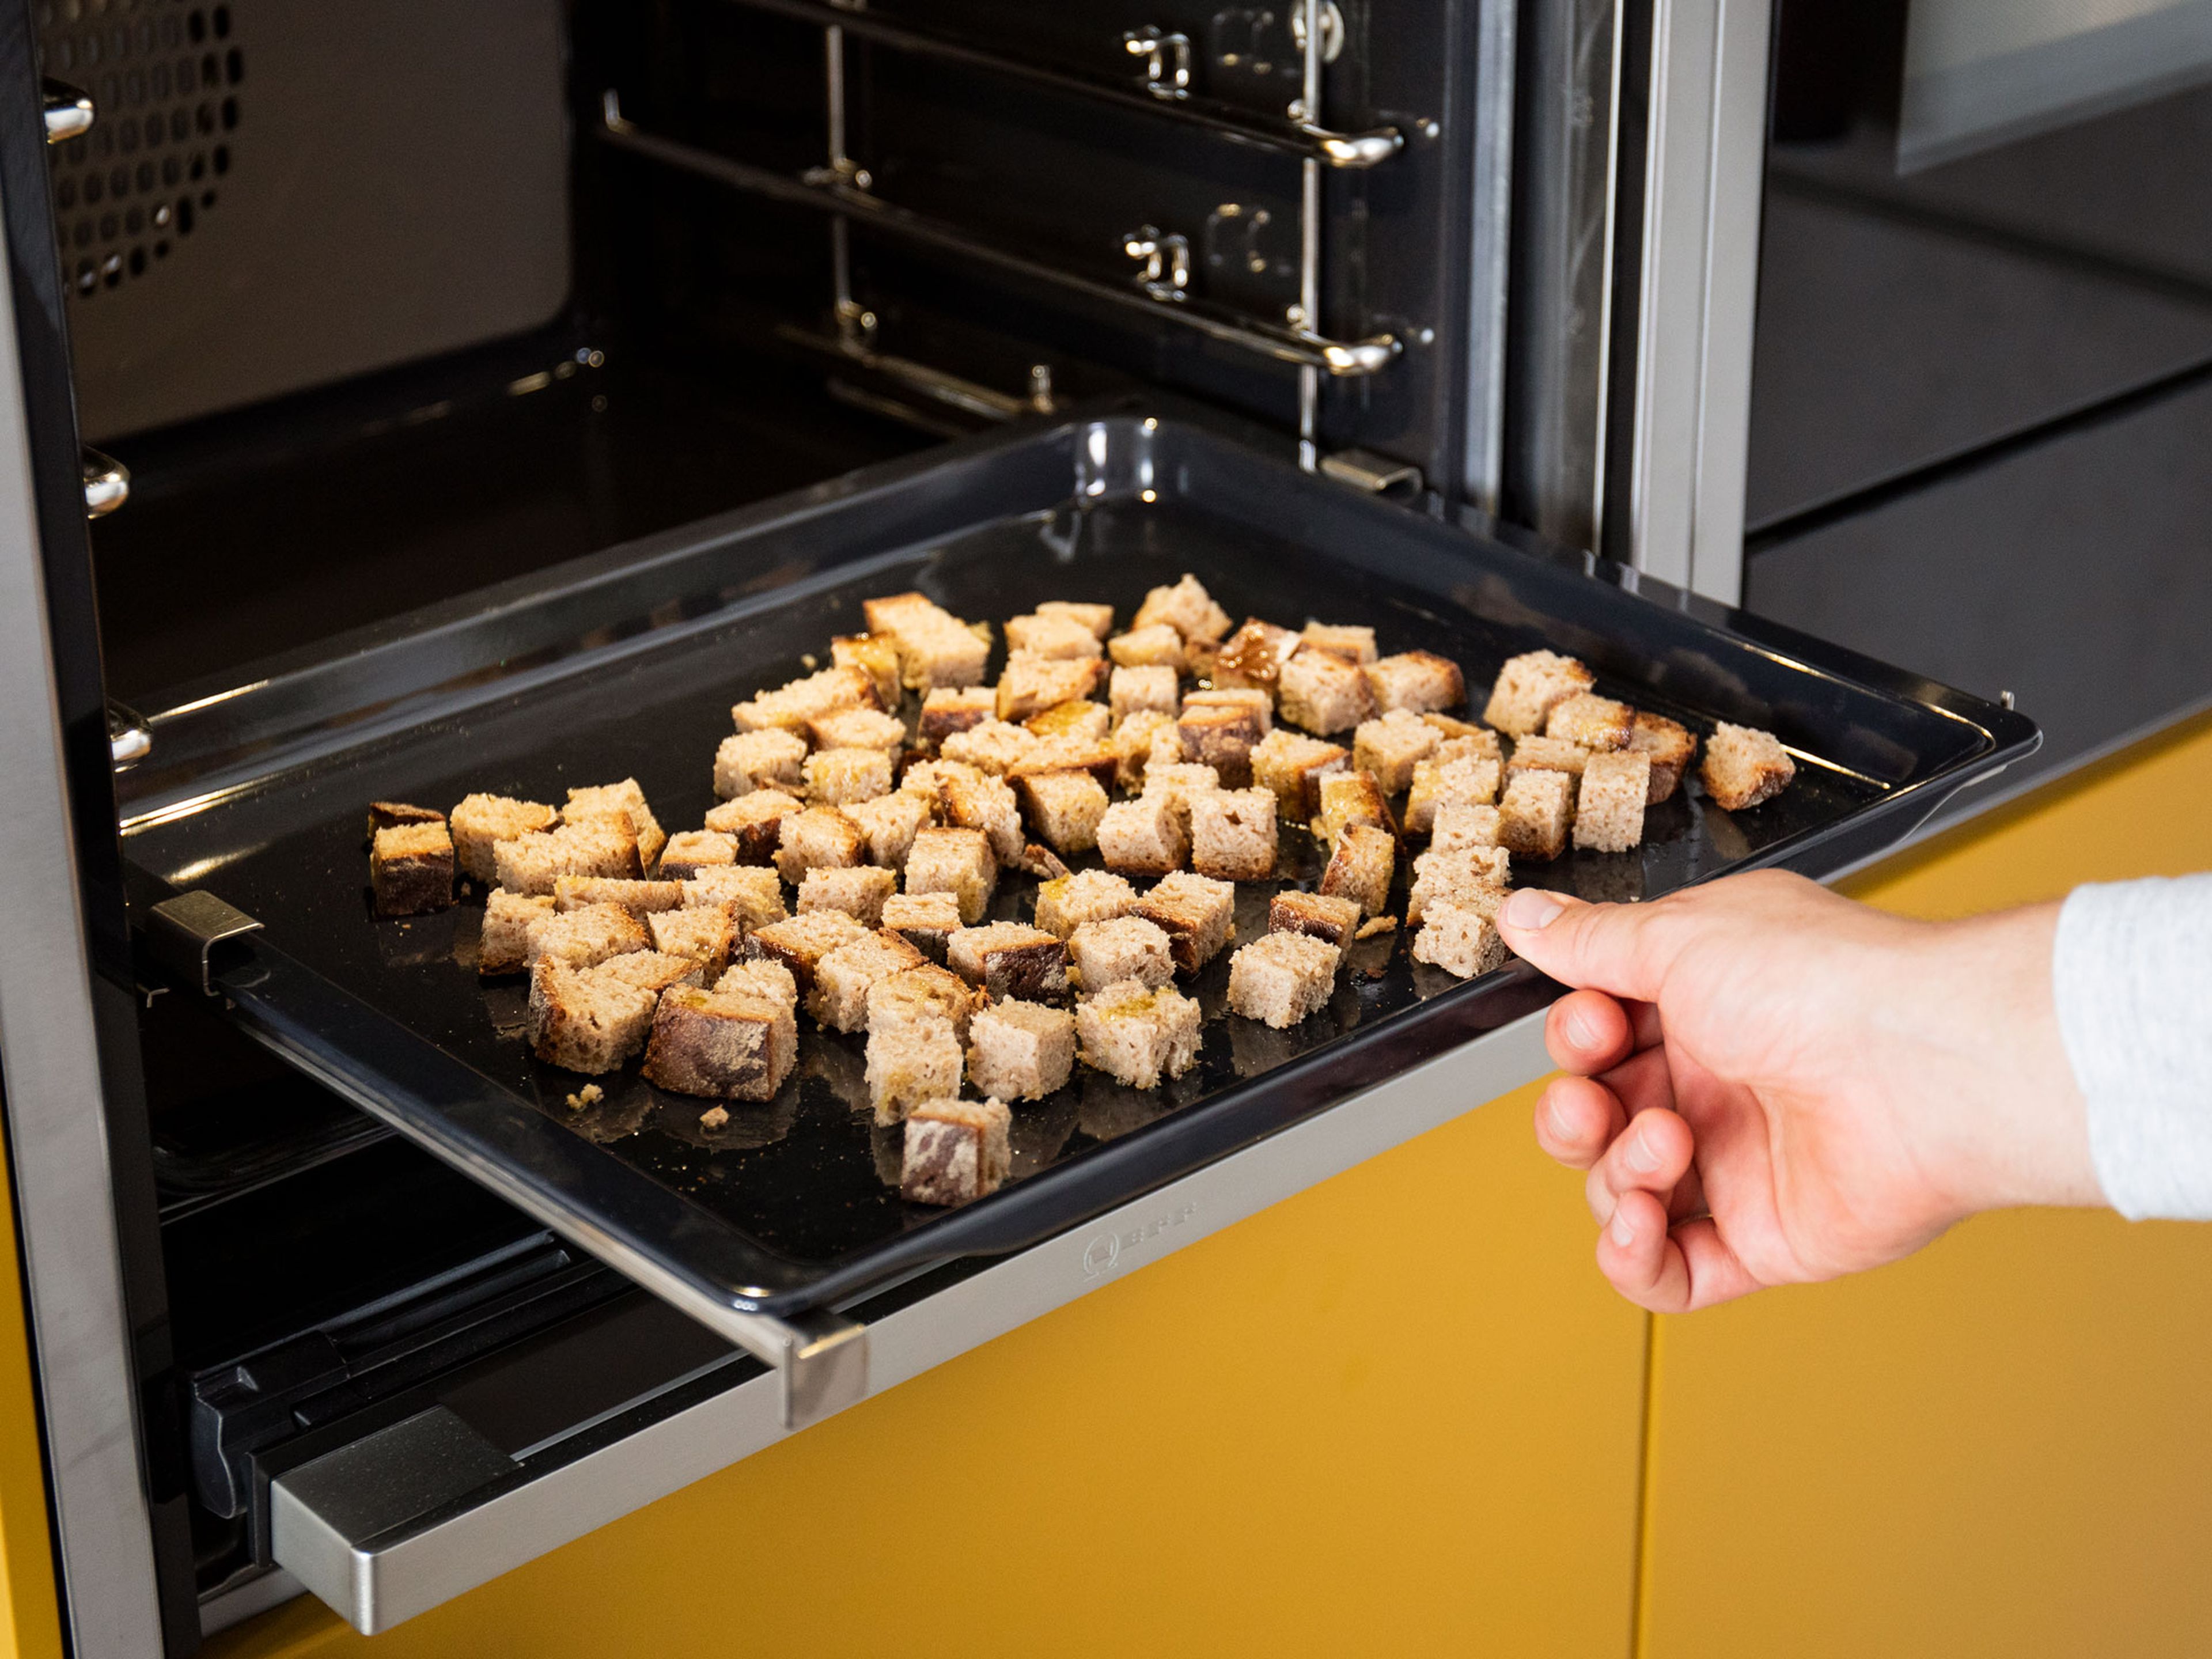 Preheat oven to 160°C/320°F. To make the croutons, cut bread into small cubes and transfer to a parchment-lined baking sheet. Toss with olive oil and bake for approx. 15 – 20 min.